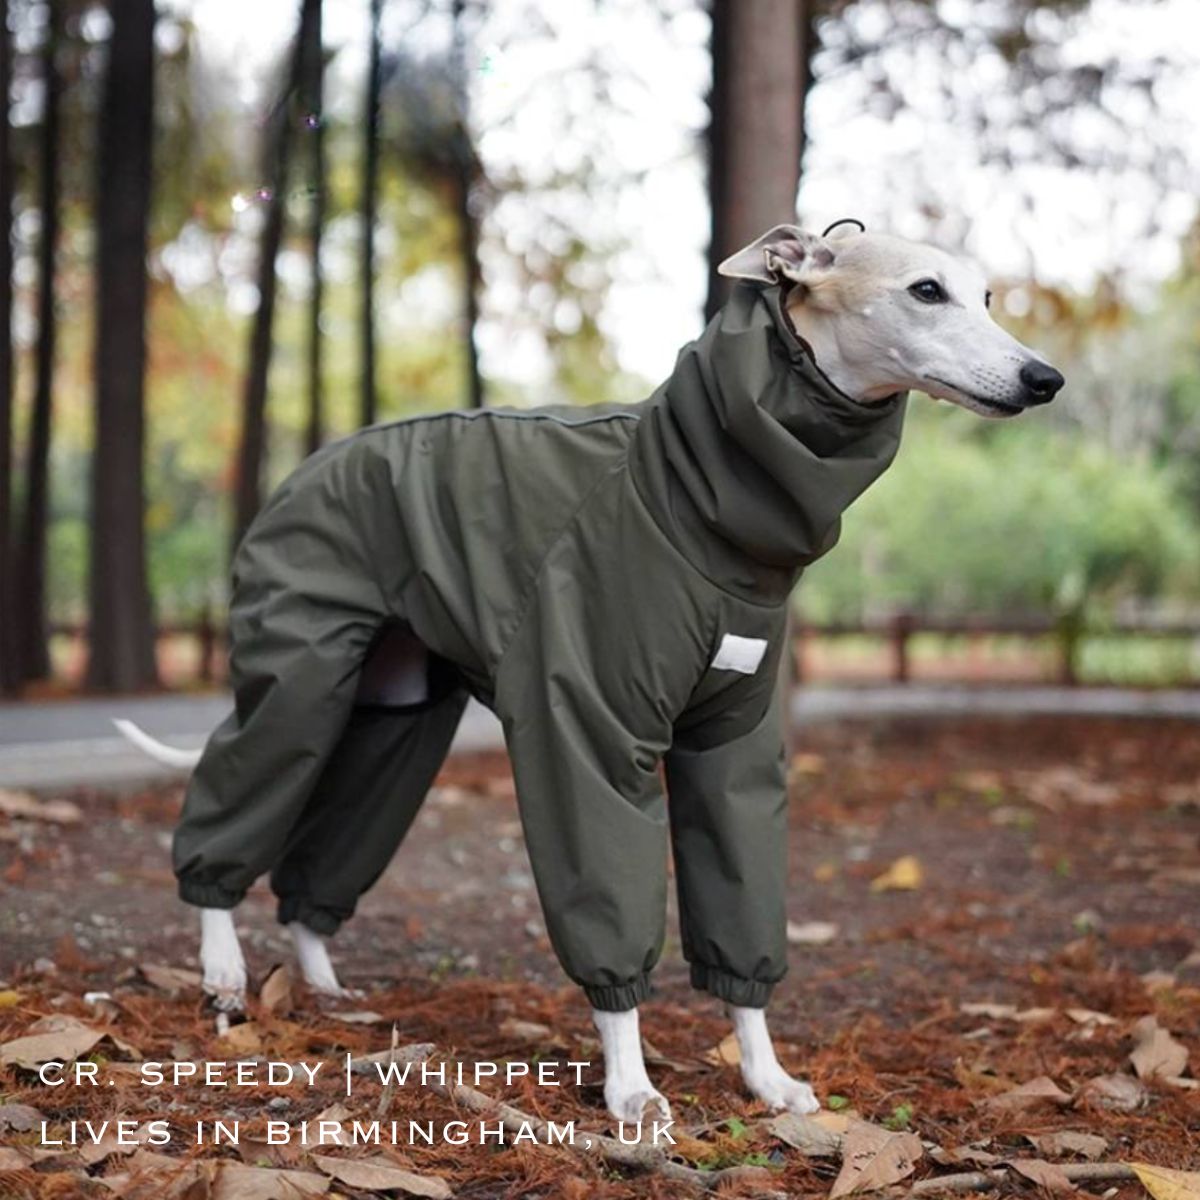 Italian Greyhound and Whippet Clothes / Iggy Jumpsuit / Dog